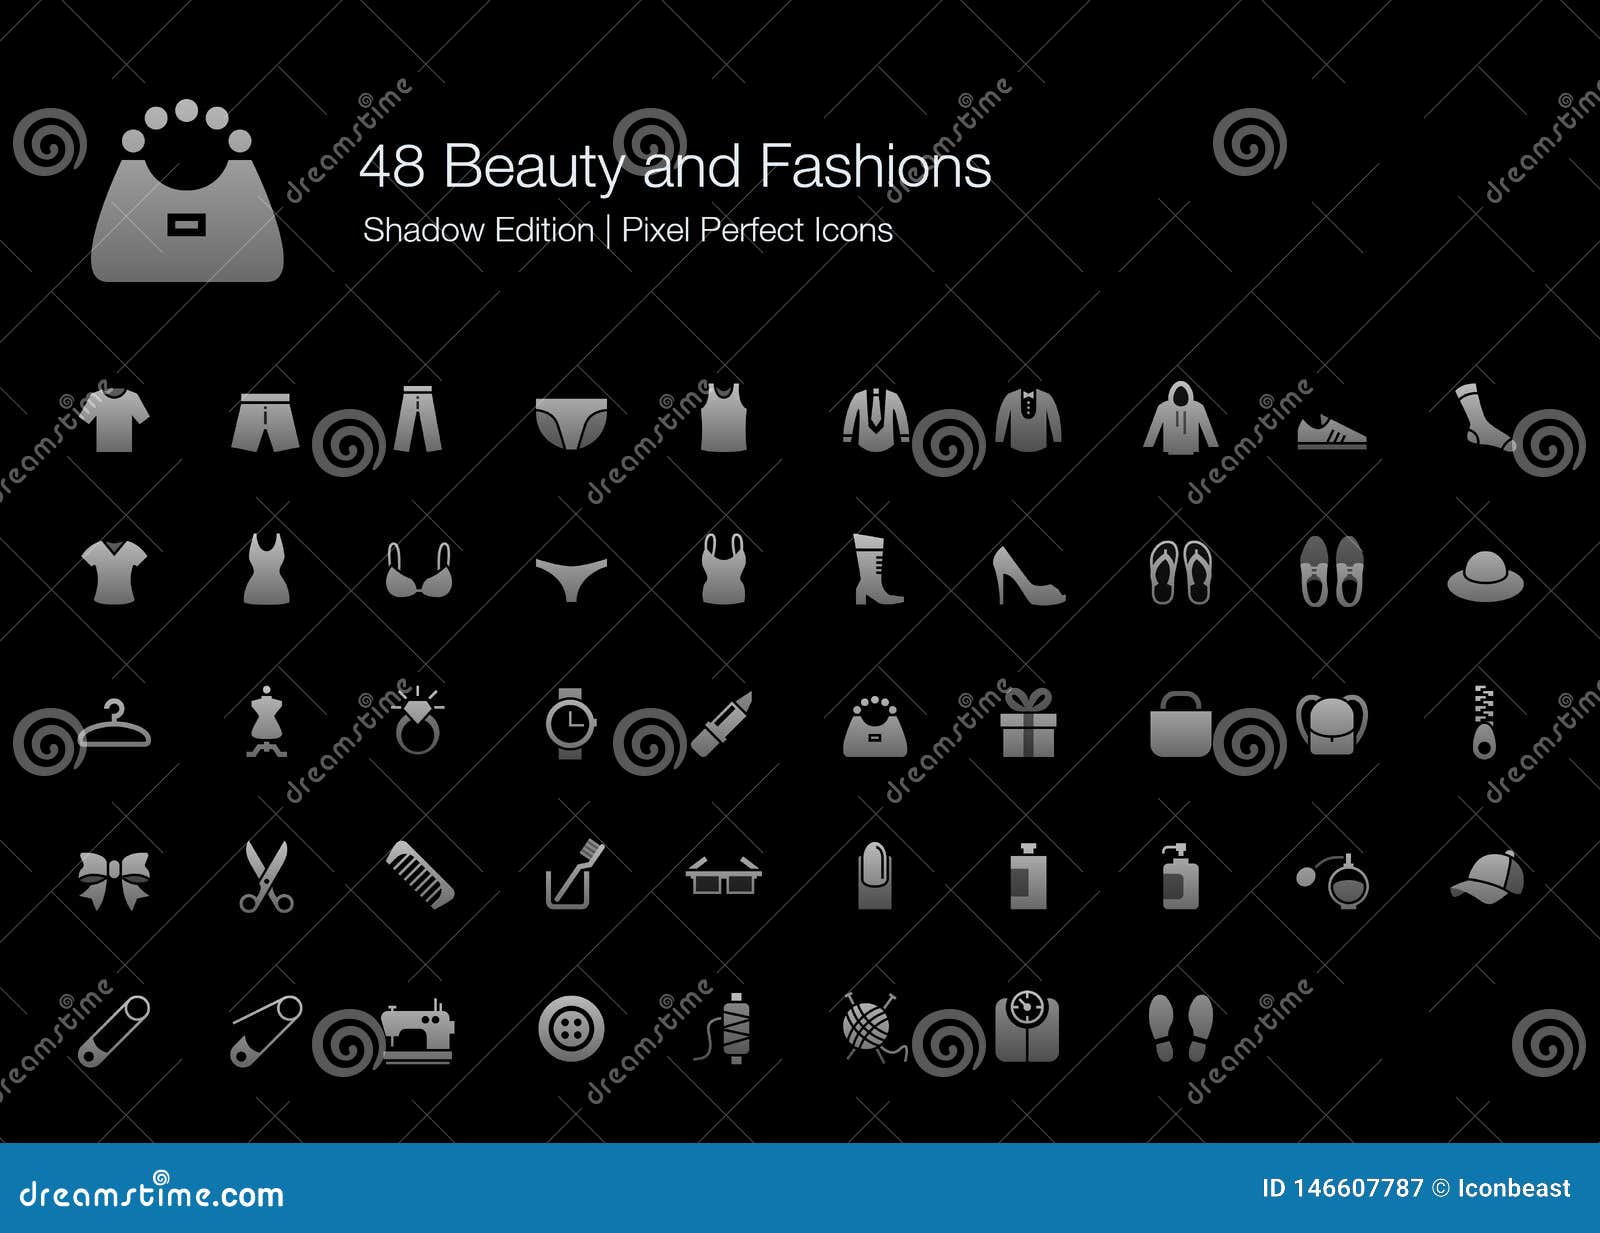 beauty and fashions pixel perfect icons shadow edition.